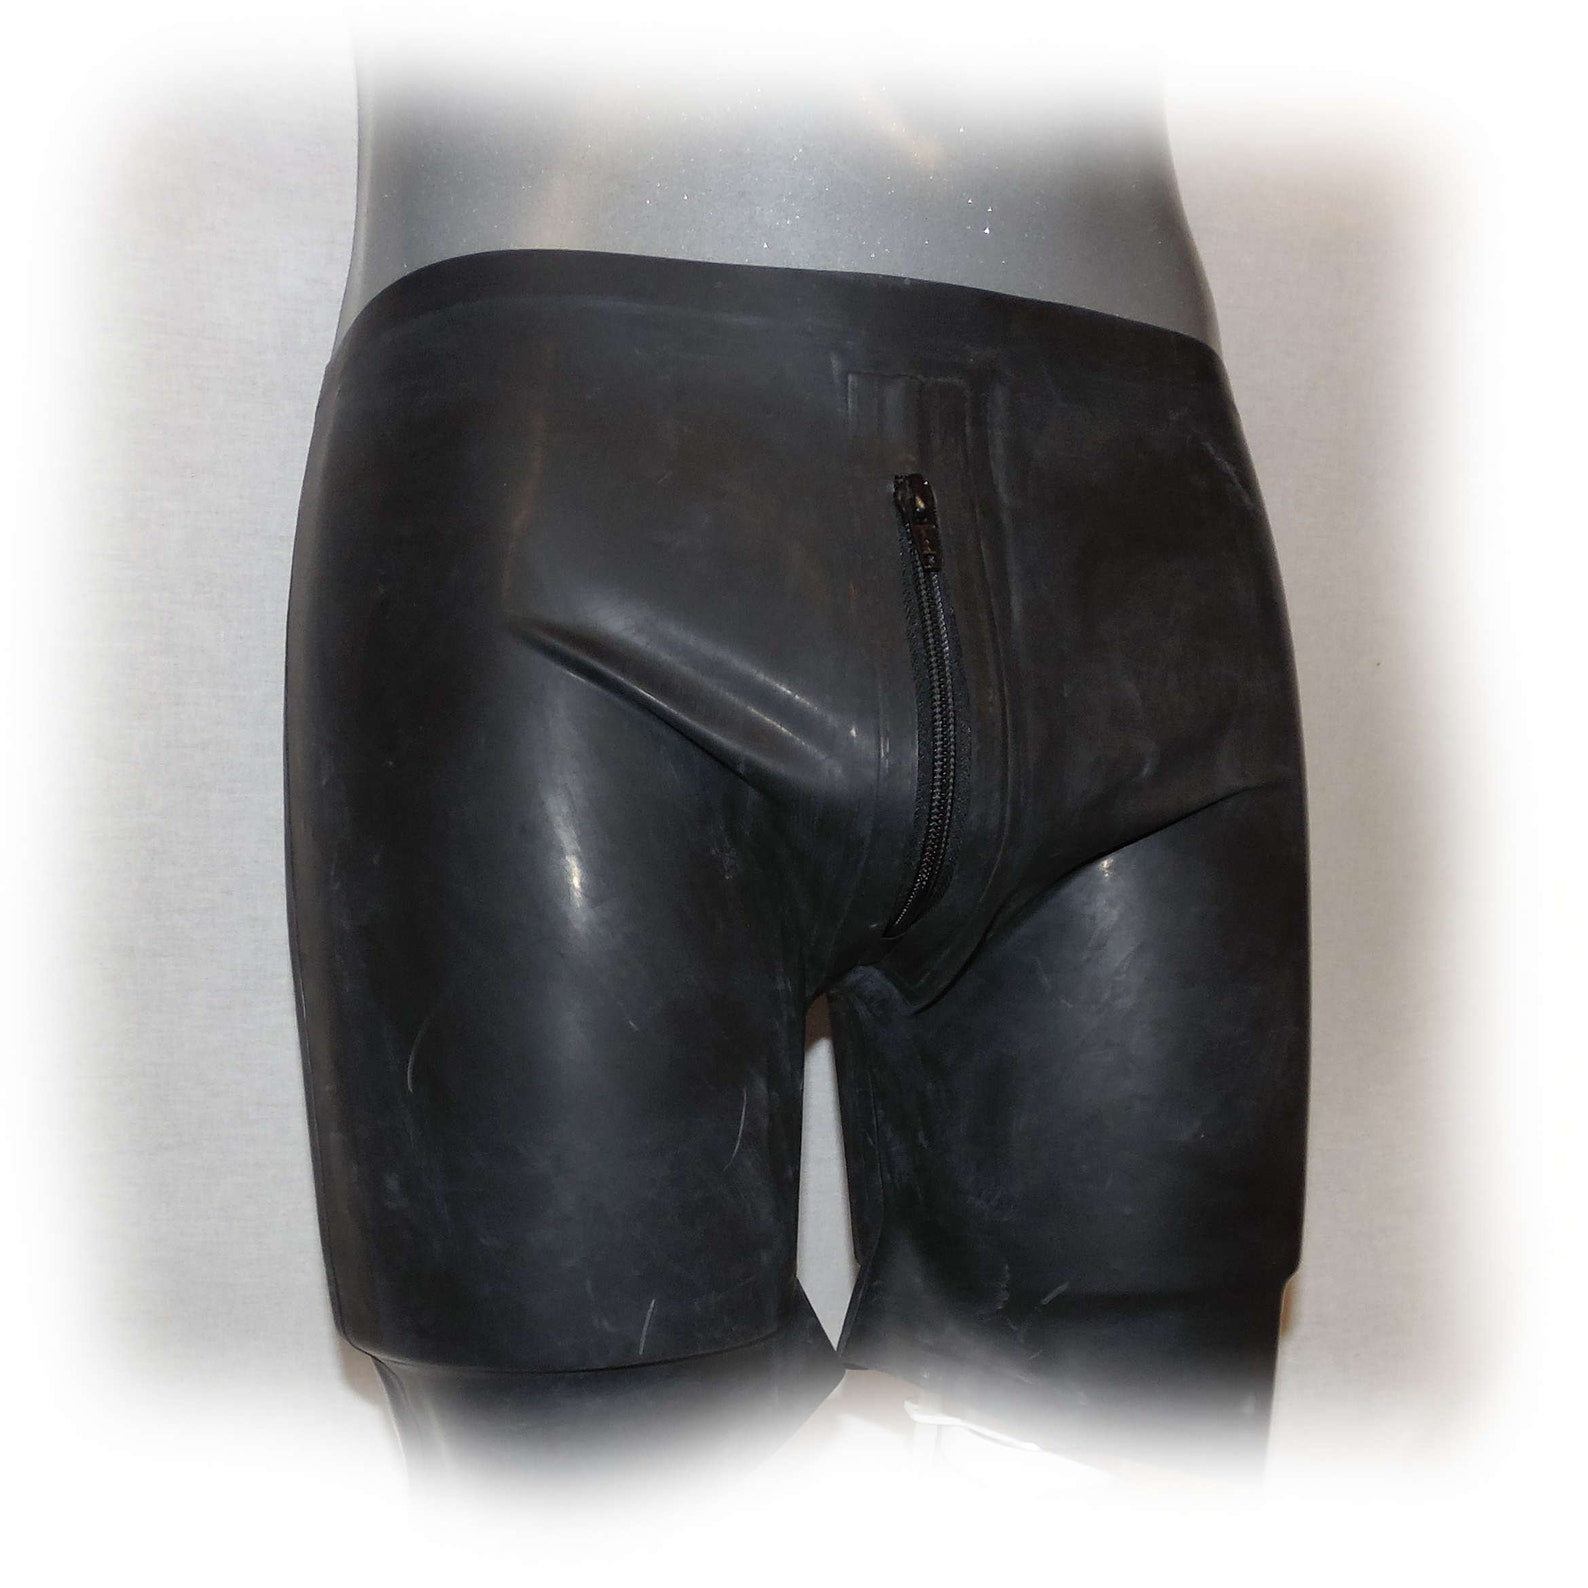 Latex Boxer Short With Zipper and Condom 0.4 Extra Strong Size - Etsy